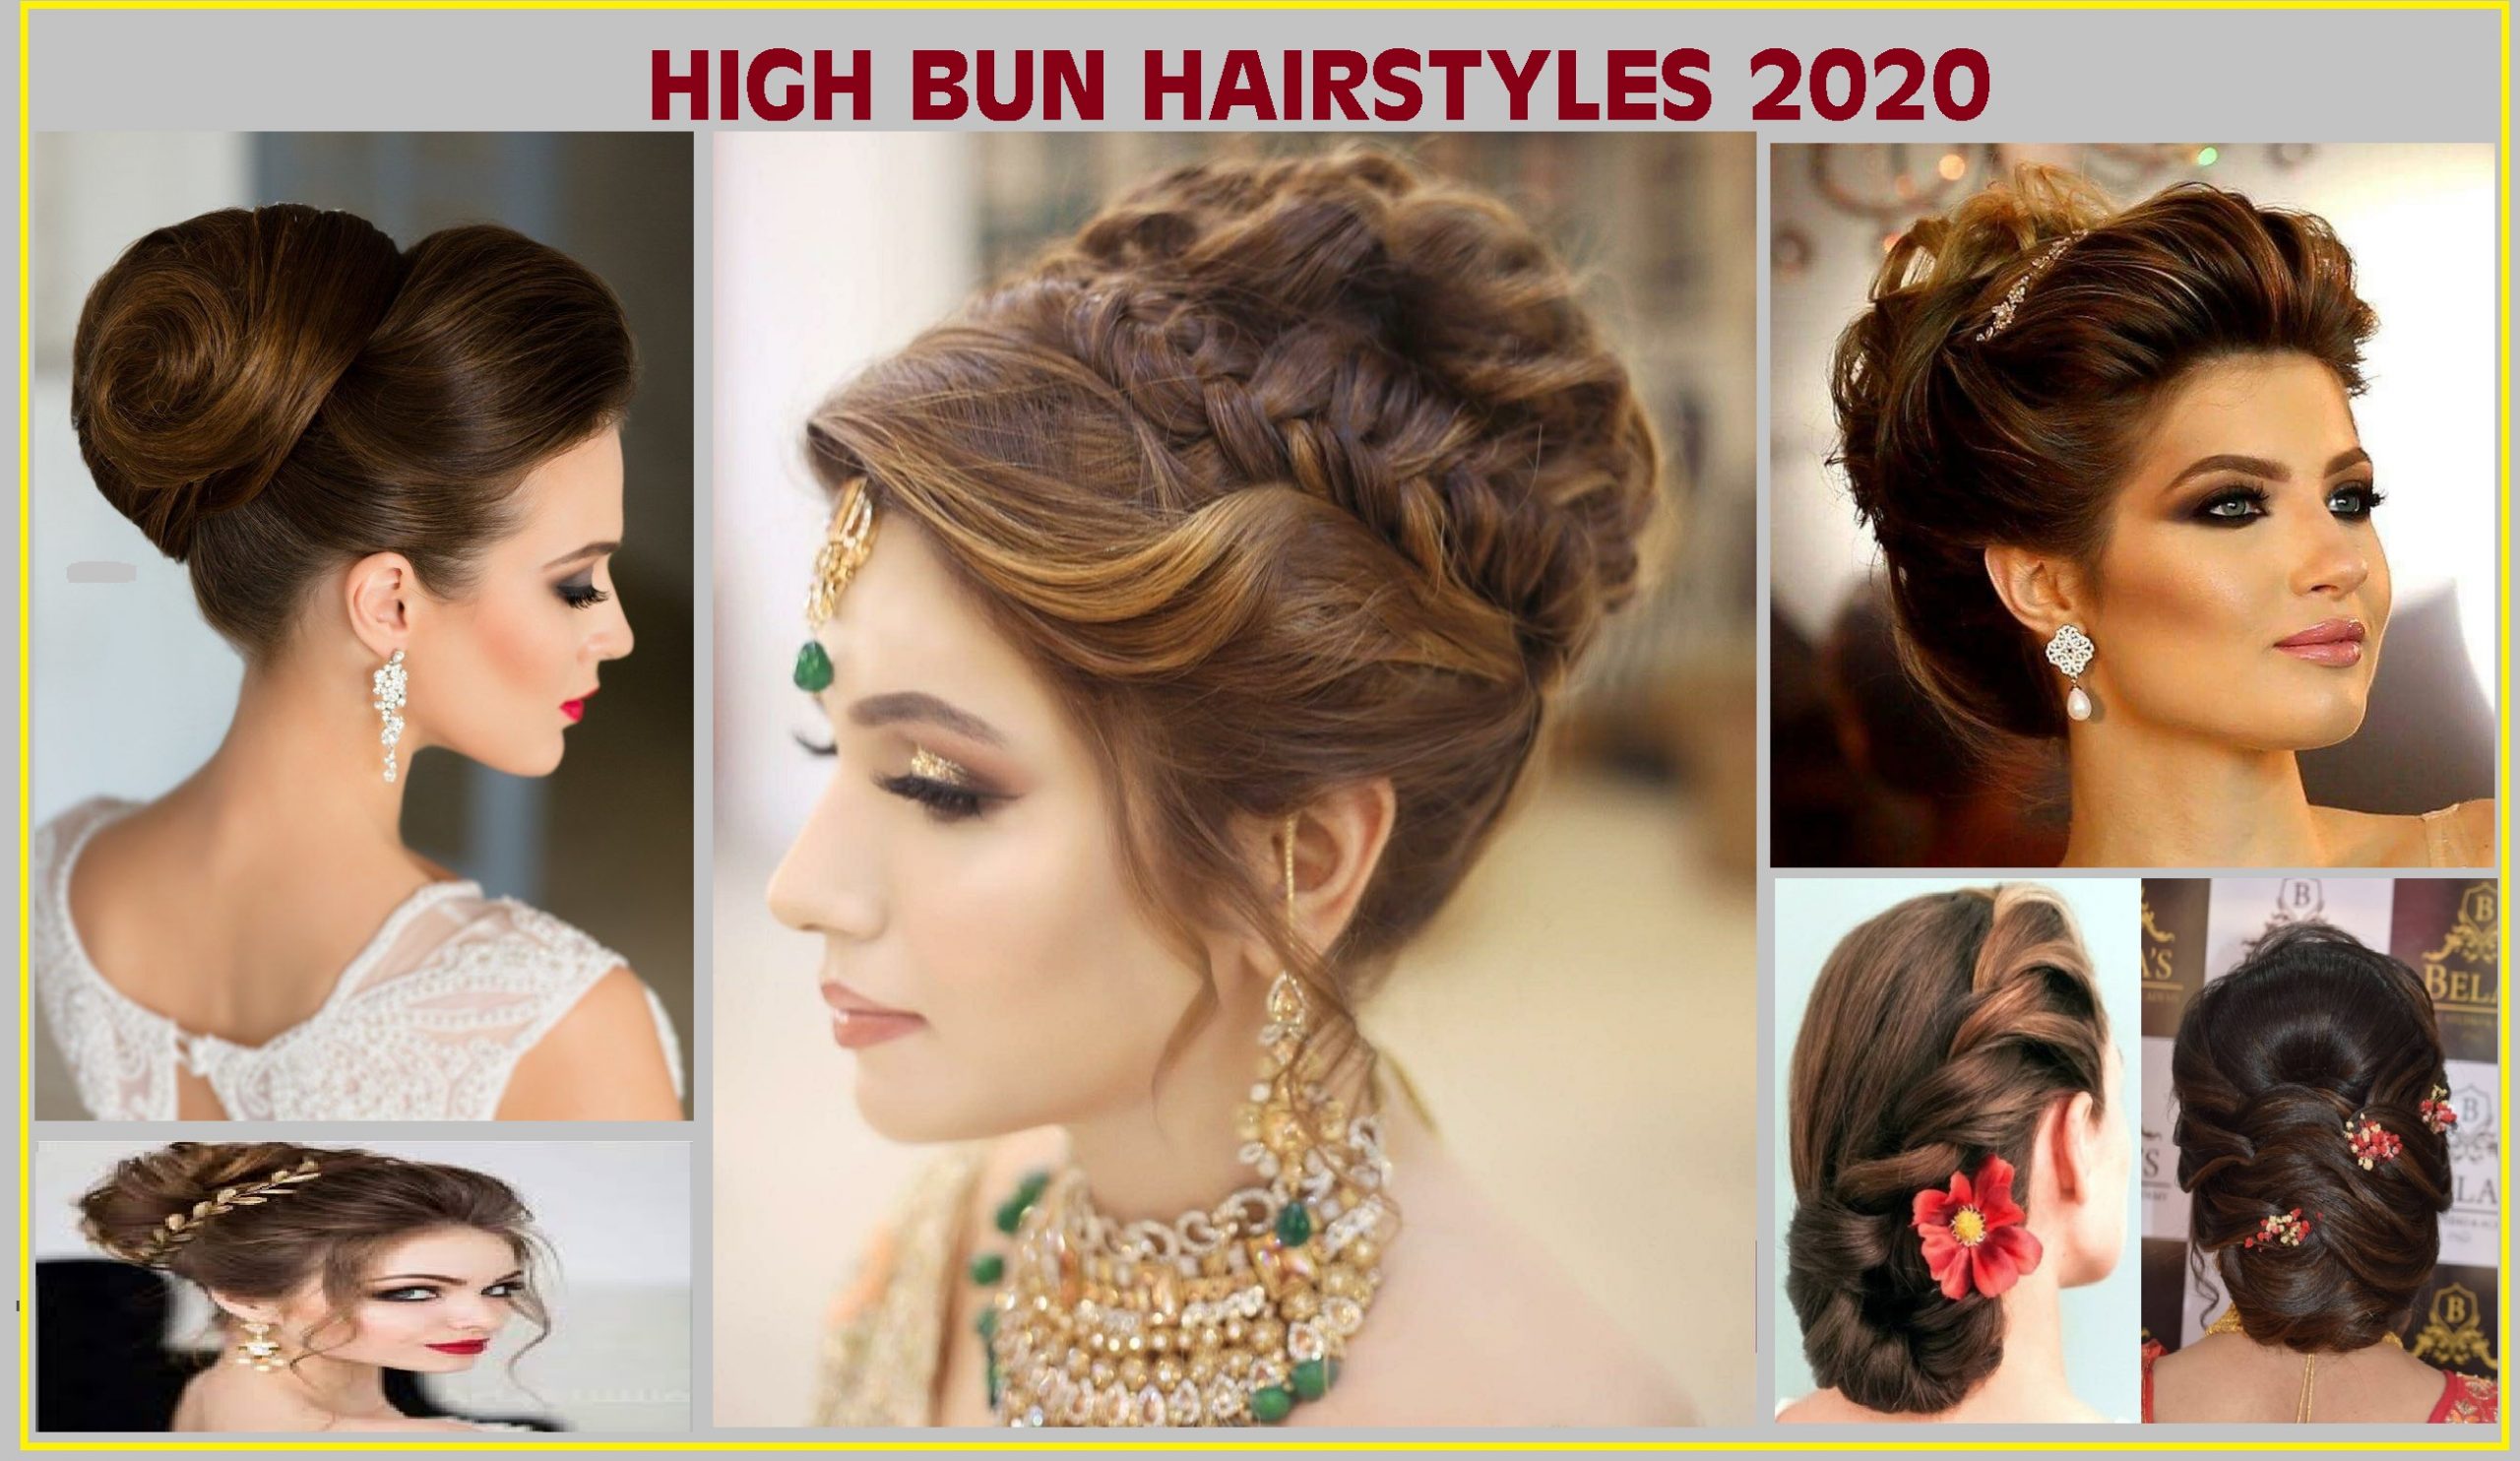 Best traditional bridal Hairstyles 2020 - Pakistan 360°